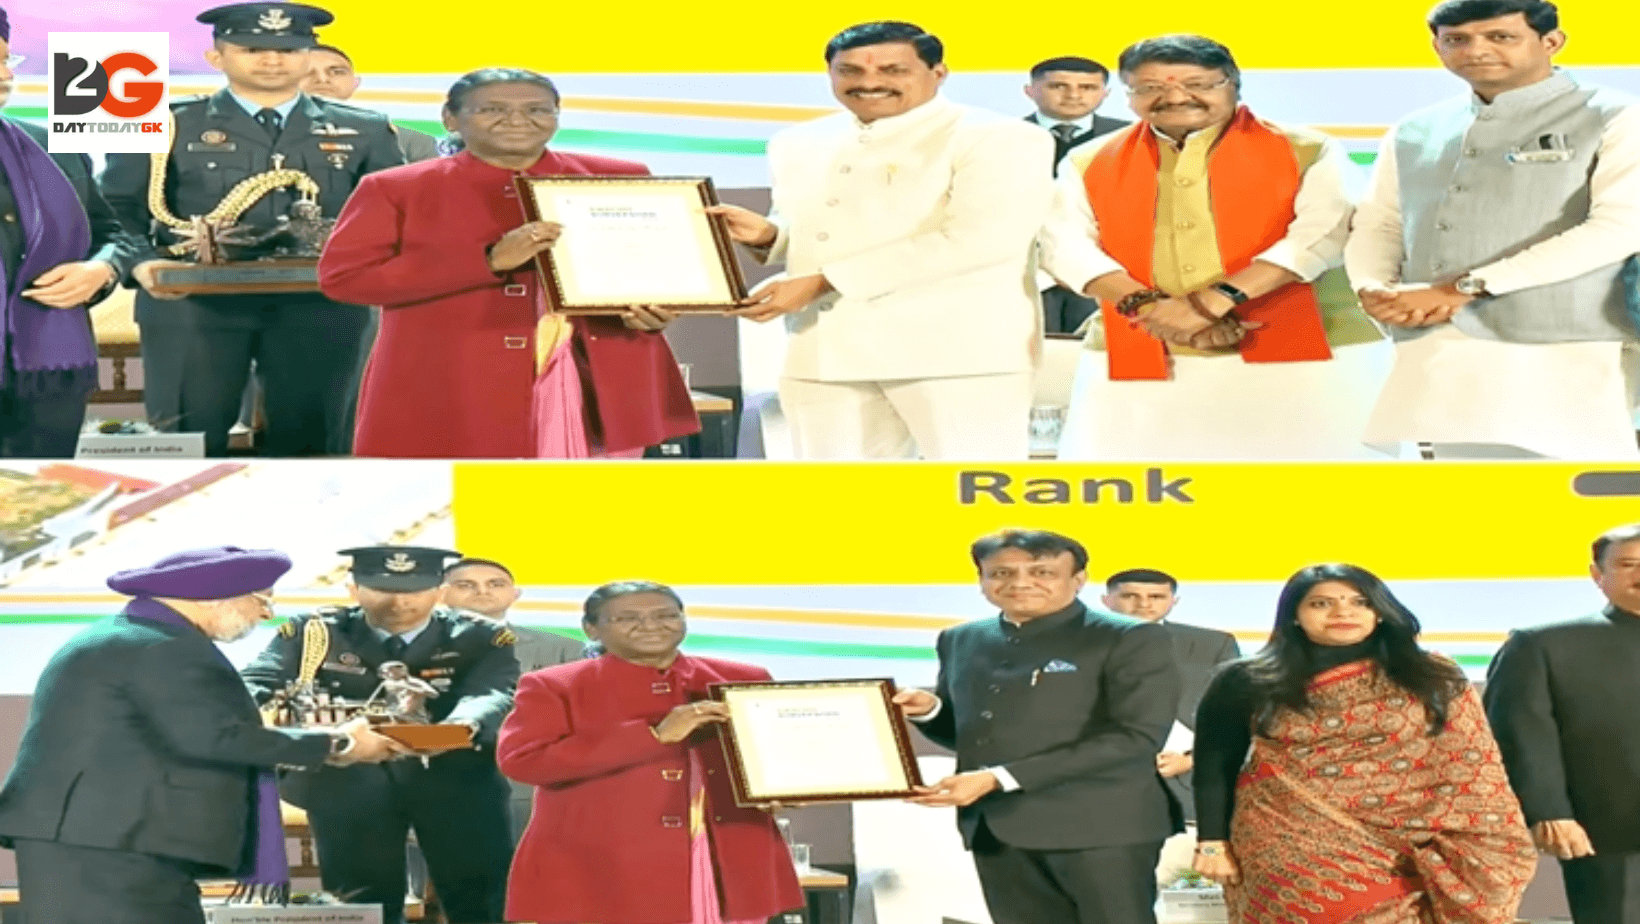 Indore and Surat received the cleanest cities award of the country – Cleanliness Survey